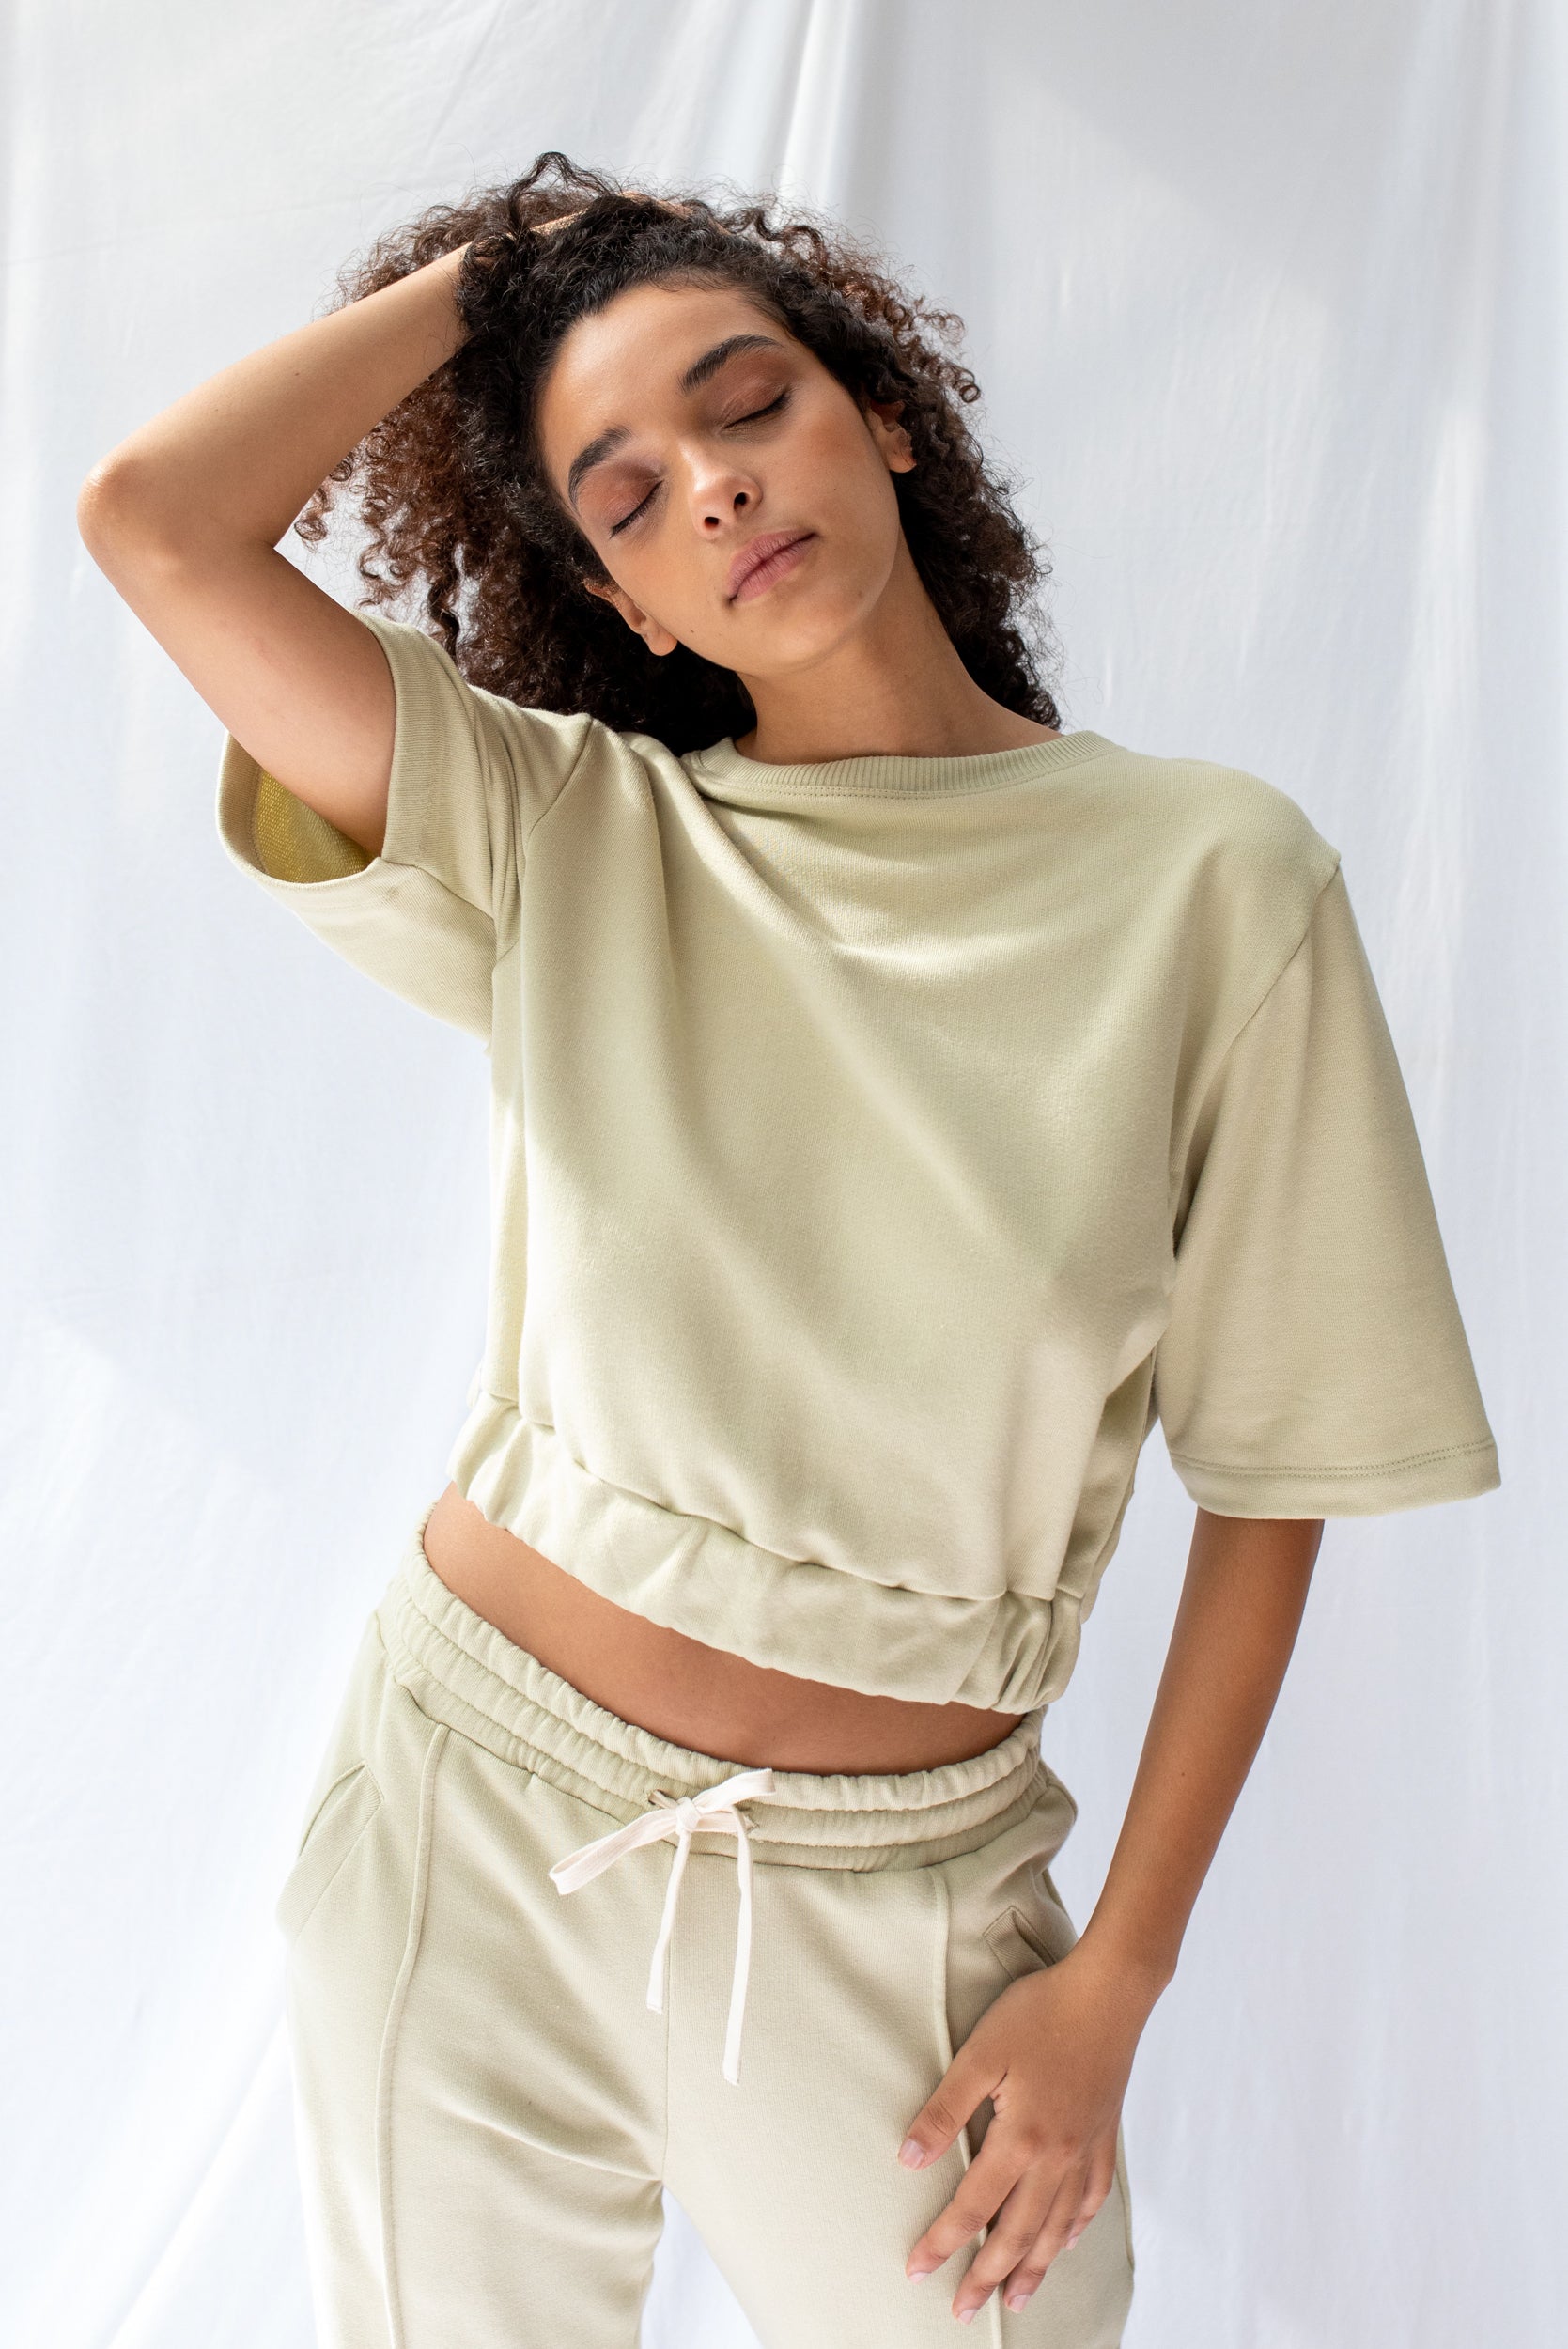 Marlo Top | Green Tea (S,M,L only)